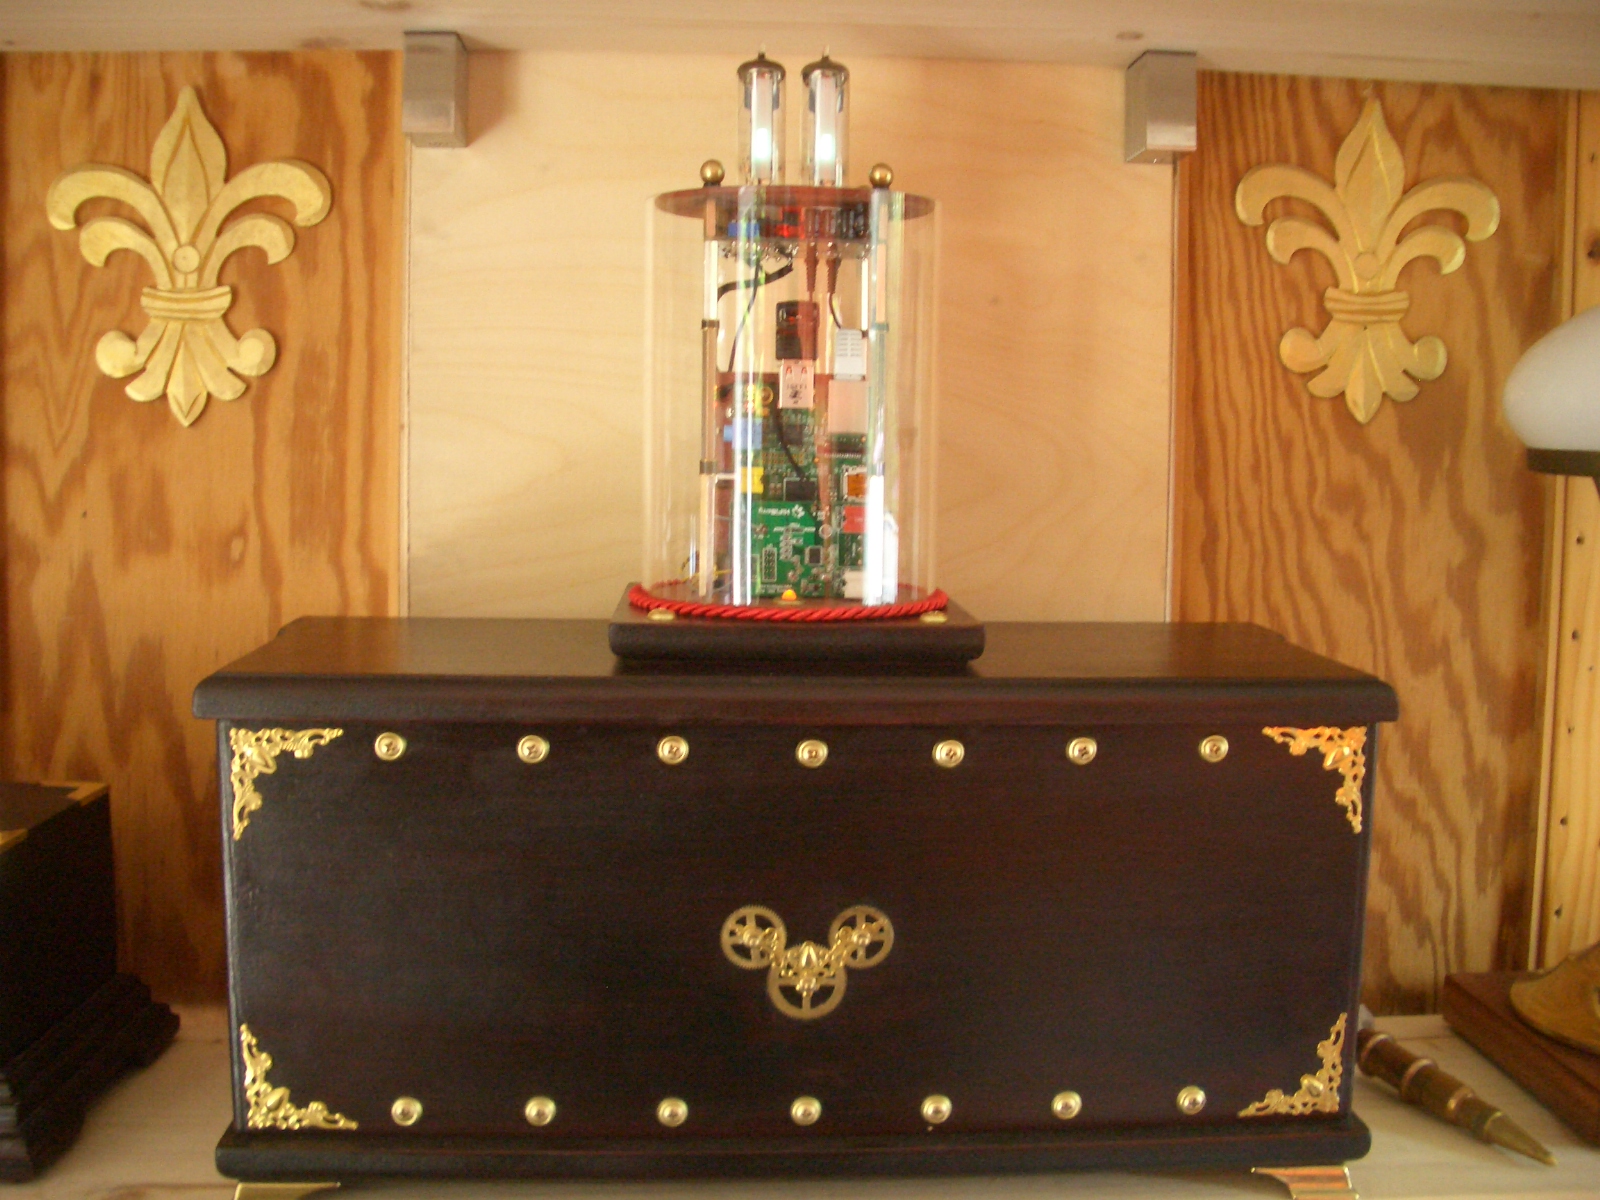 A Steampunk MP3 Player with real indicator tubes